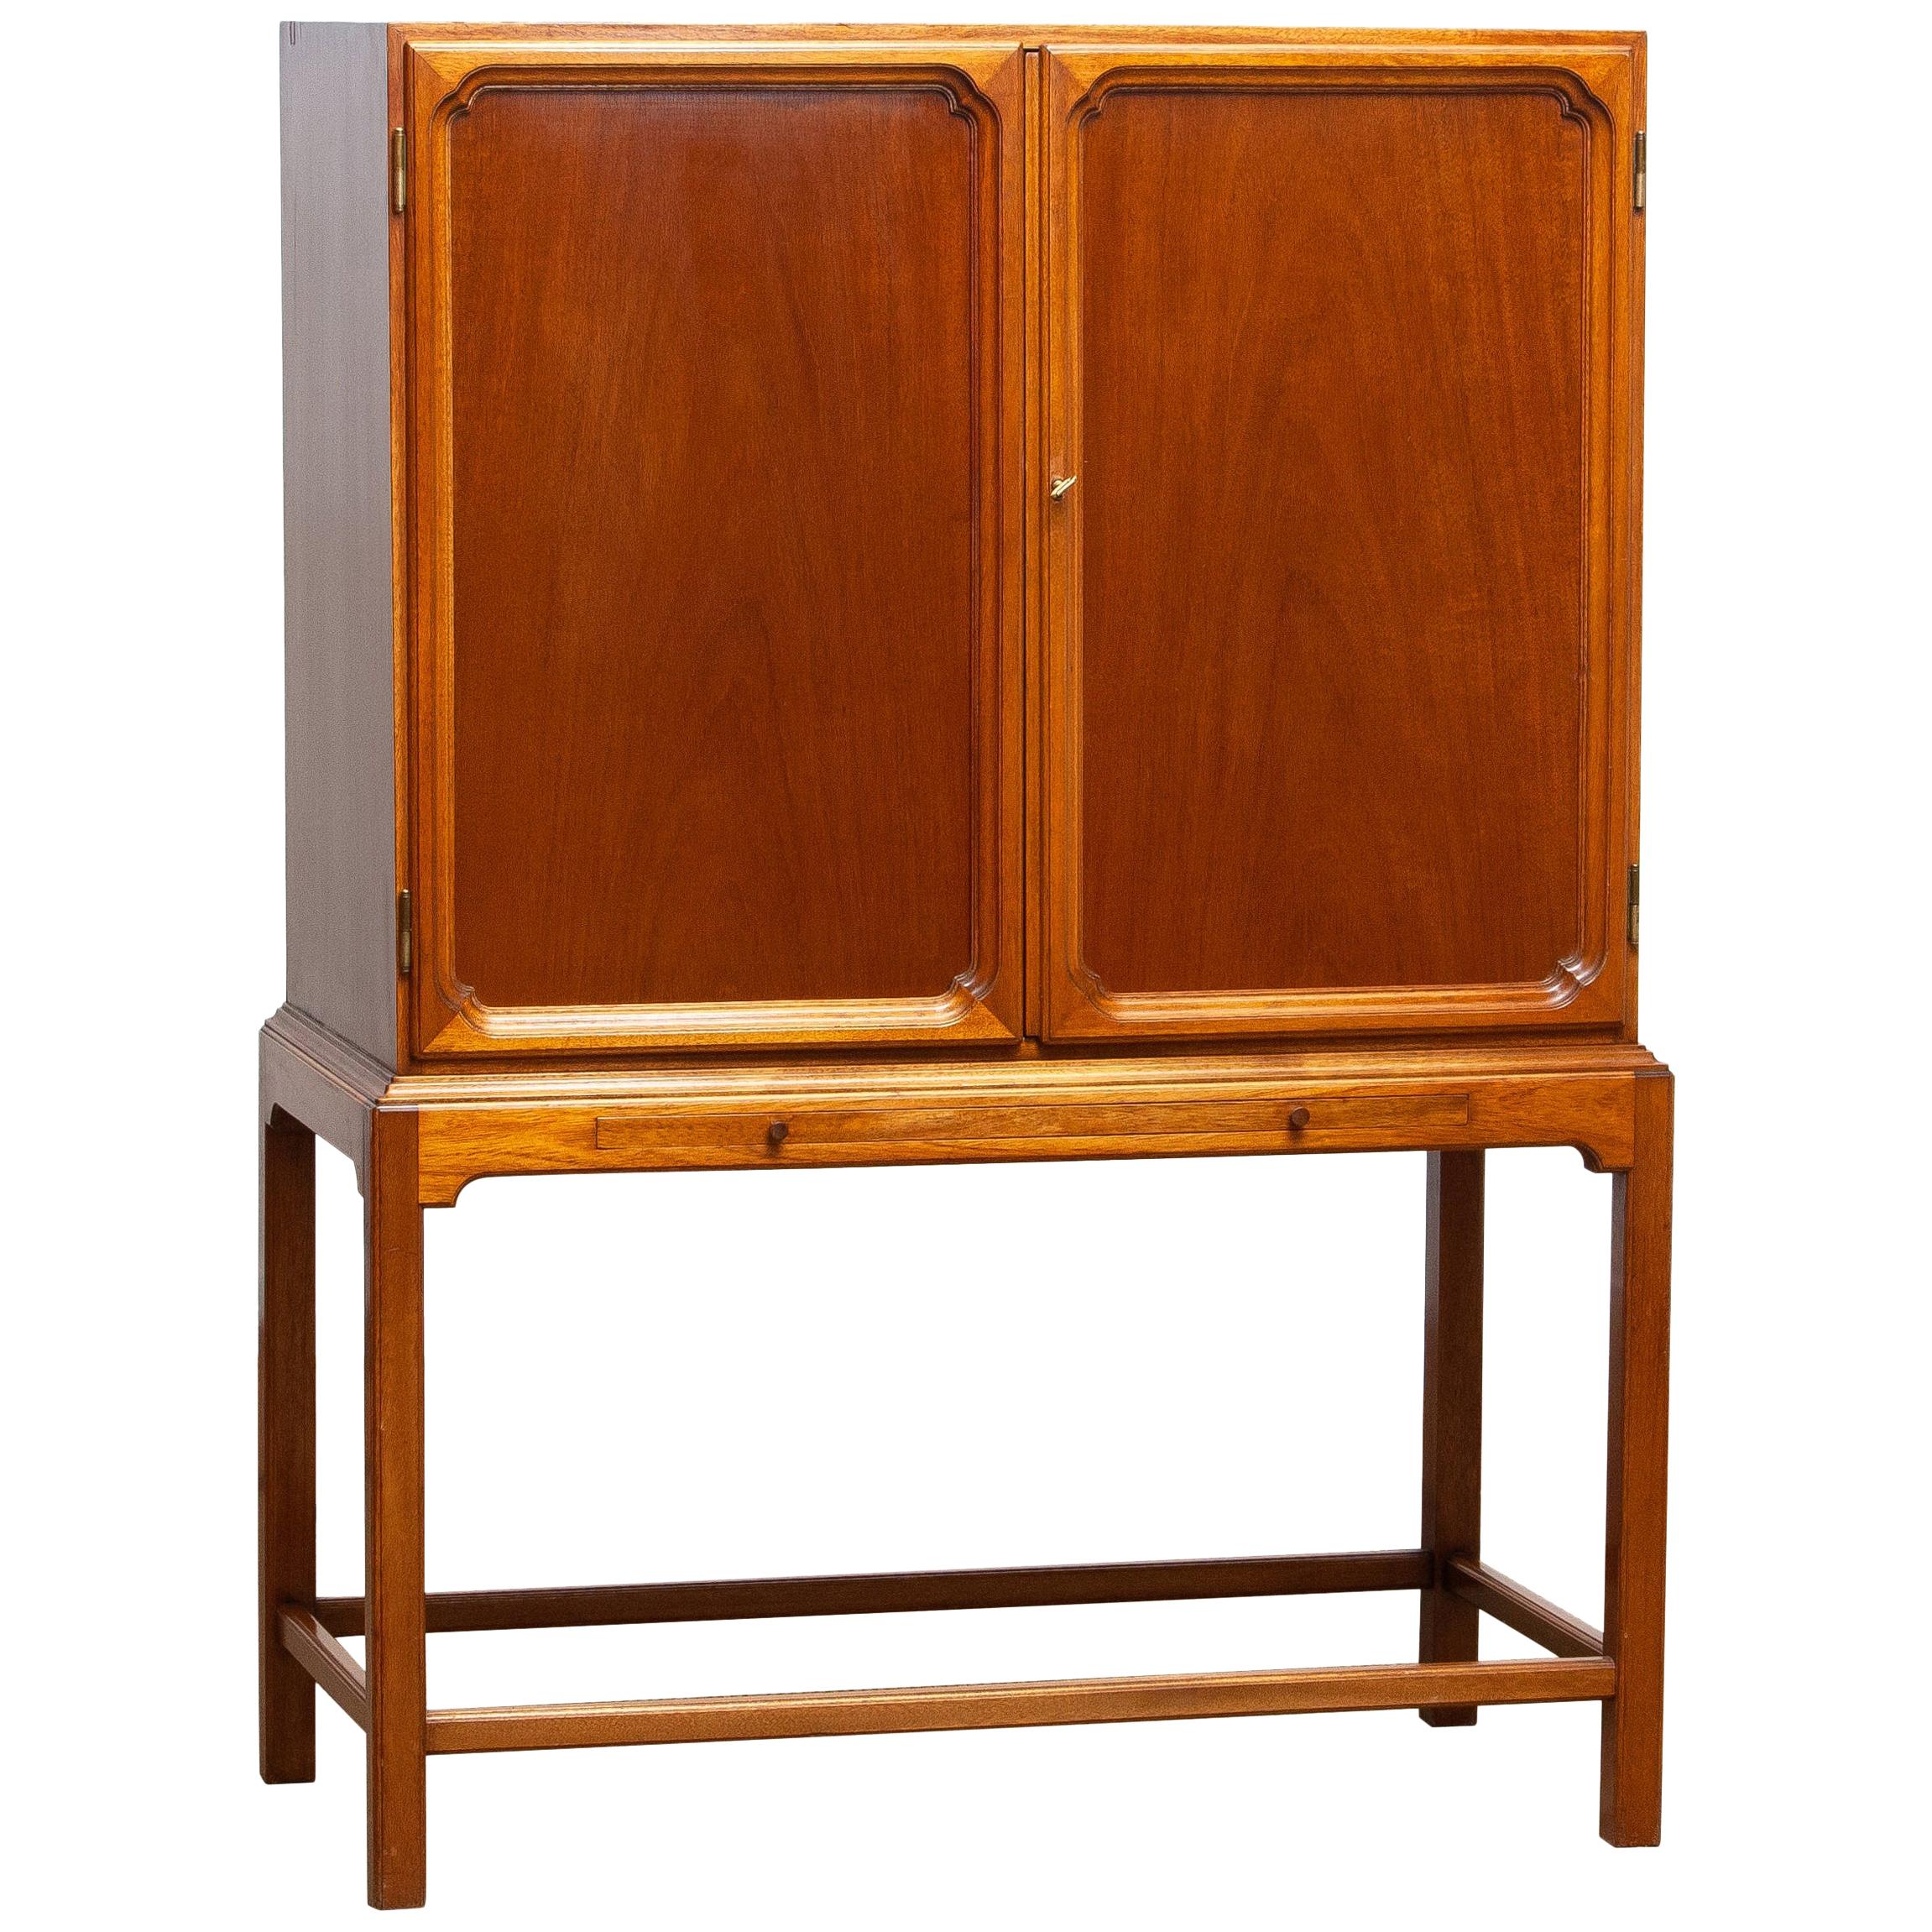 Beautiful dry bar / cabinet in mahogany on tall slim legs made in Sweden, 1950s.
Equipped with two lockable doors with behind four drawers and shelves. The shelves and rear are decorated with glass mirrors. Also an extendable shelf at the front